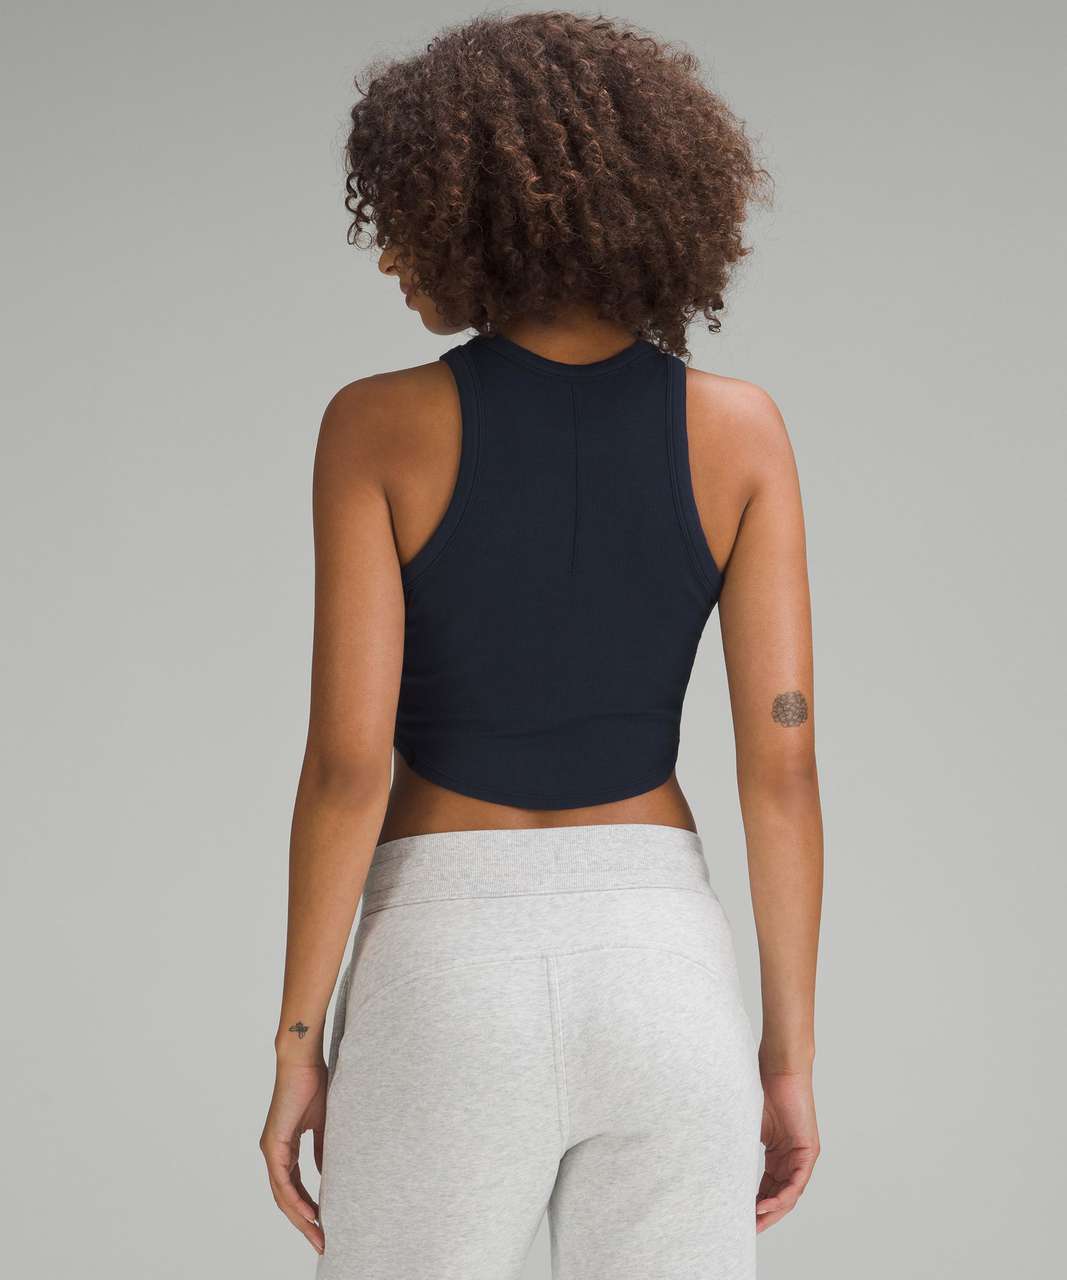 Lululemon Hold Tight Cropped Tank Top - True Navy